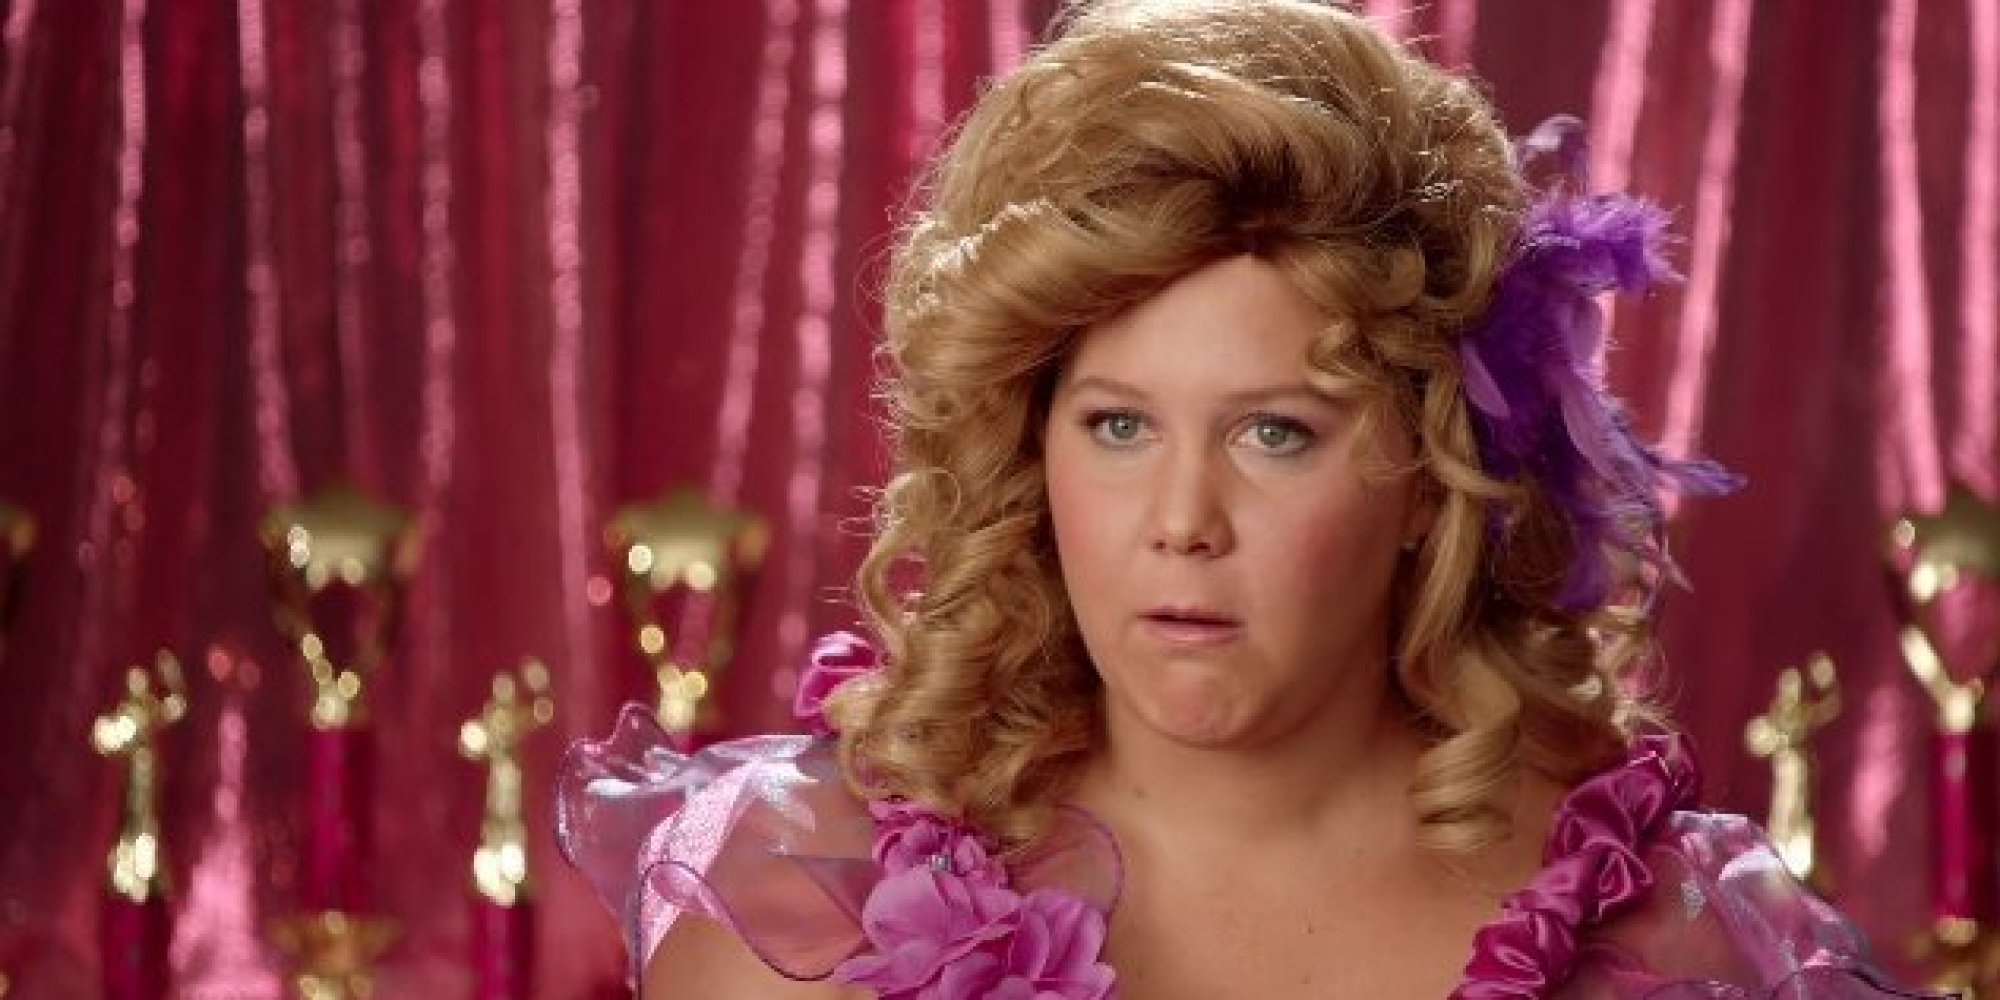 Amy Schumer Goes Inside The World Of Child Beauty Pageants HuffPost